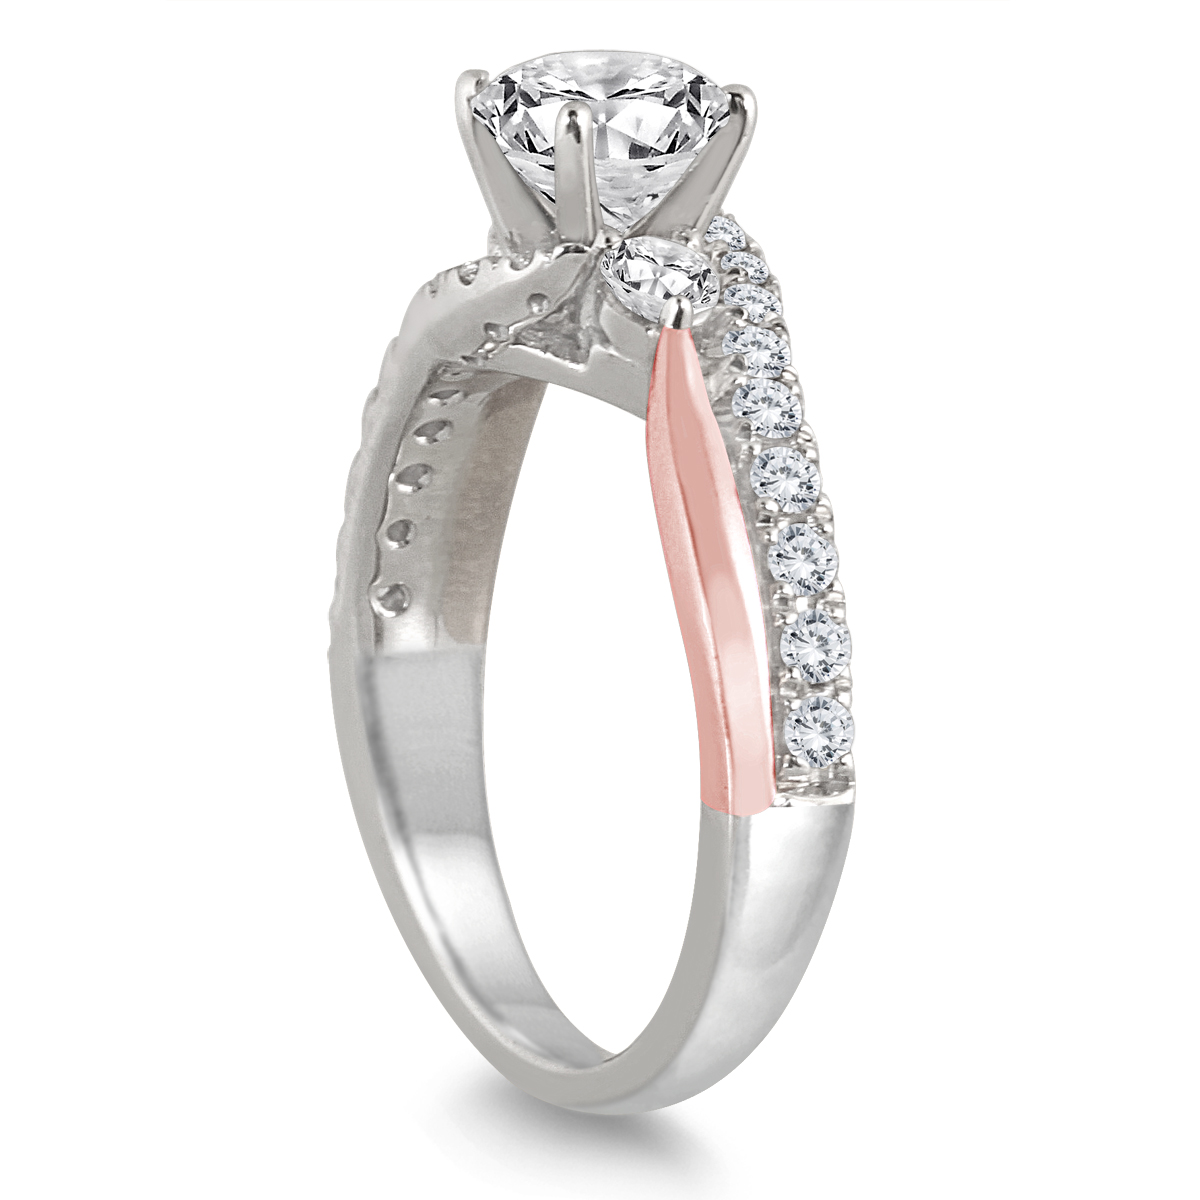 szul.com AGS Certified 1 1/4 Carat TW Diamond Engagement Ring in Two Tone 14K Pink and White Gold (I-J Color,